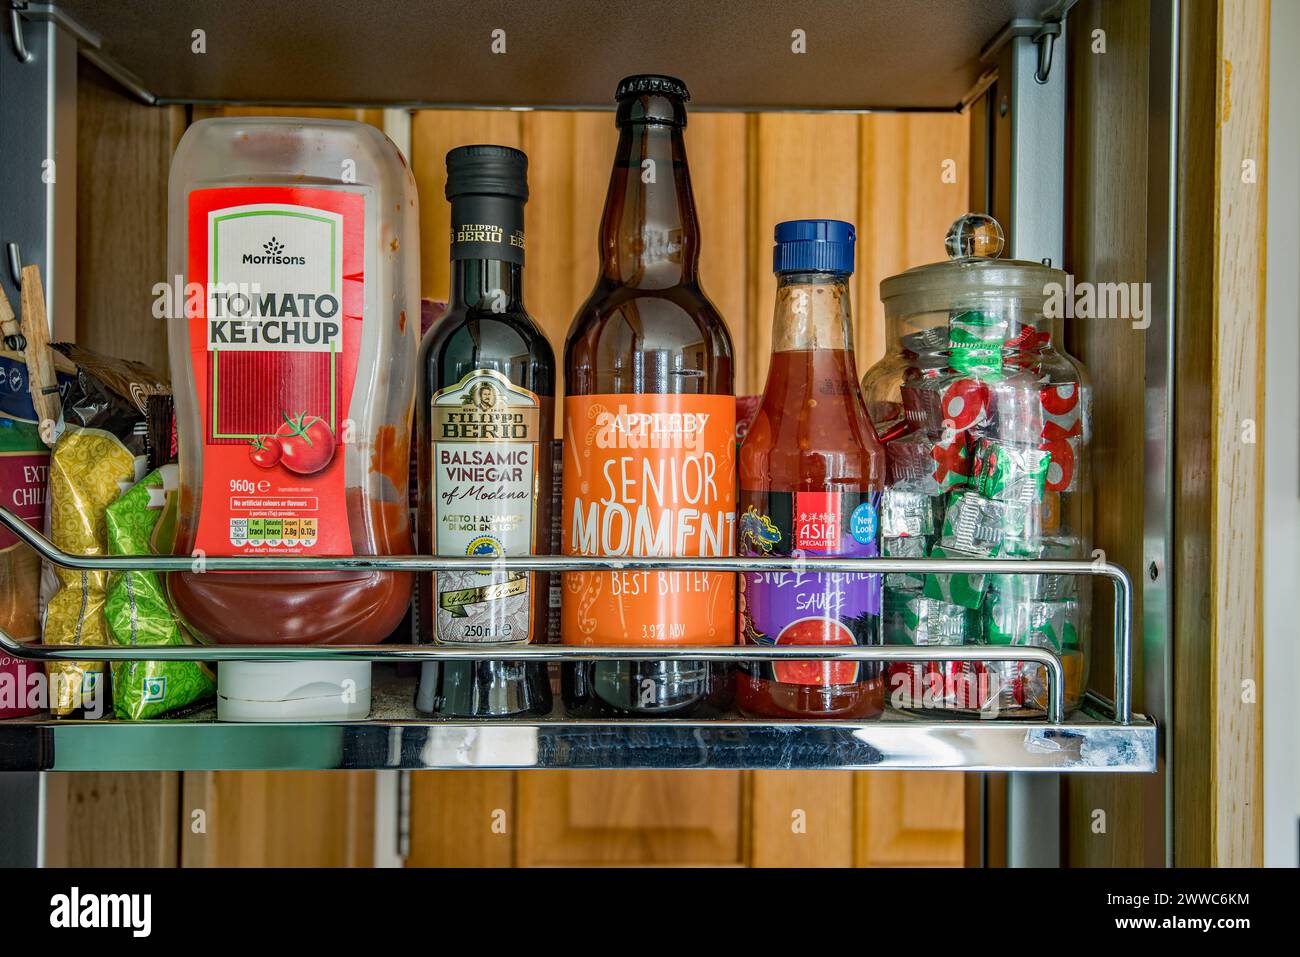 A Senior Moment in the kitchen with a misplaced bottle of beer on a shelf full of sauces etc Stock Photo